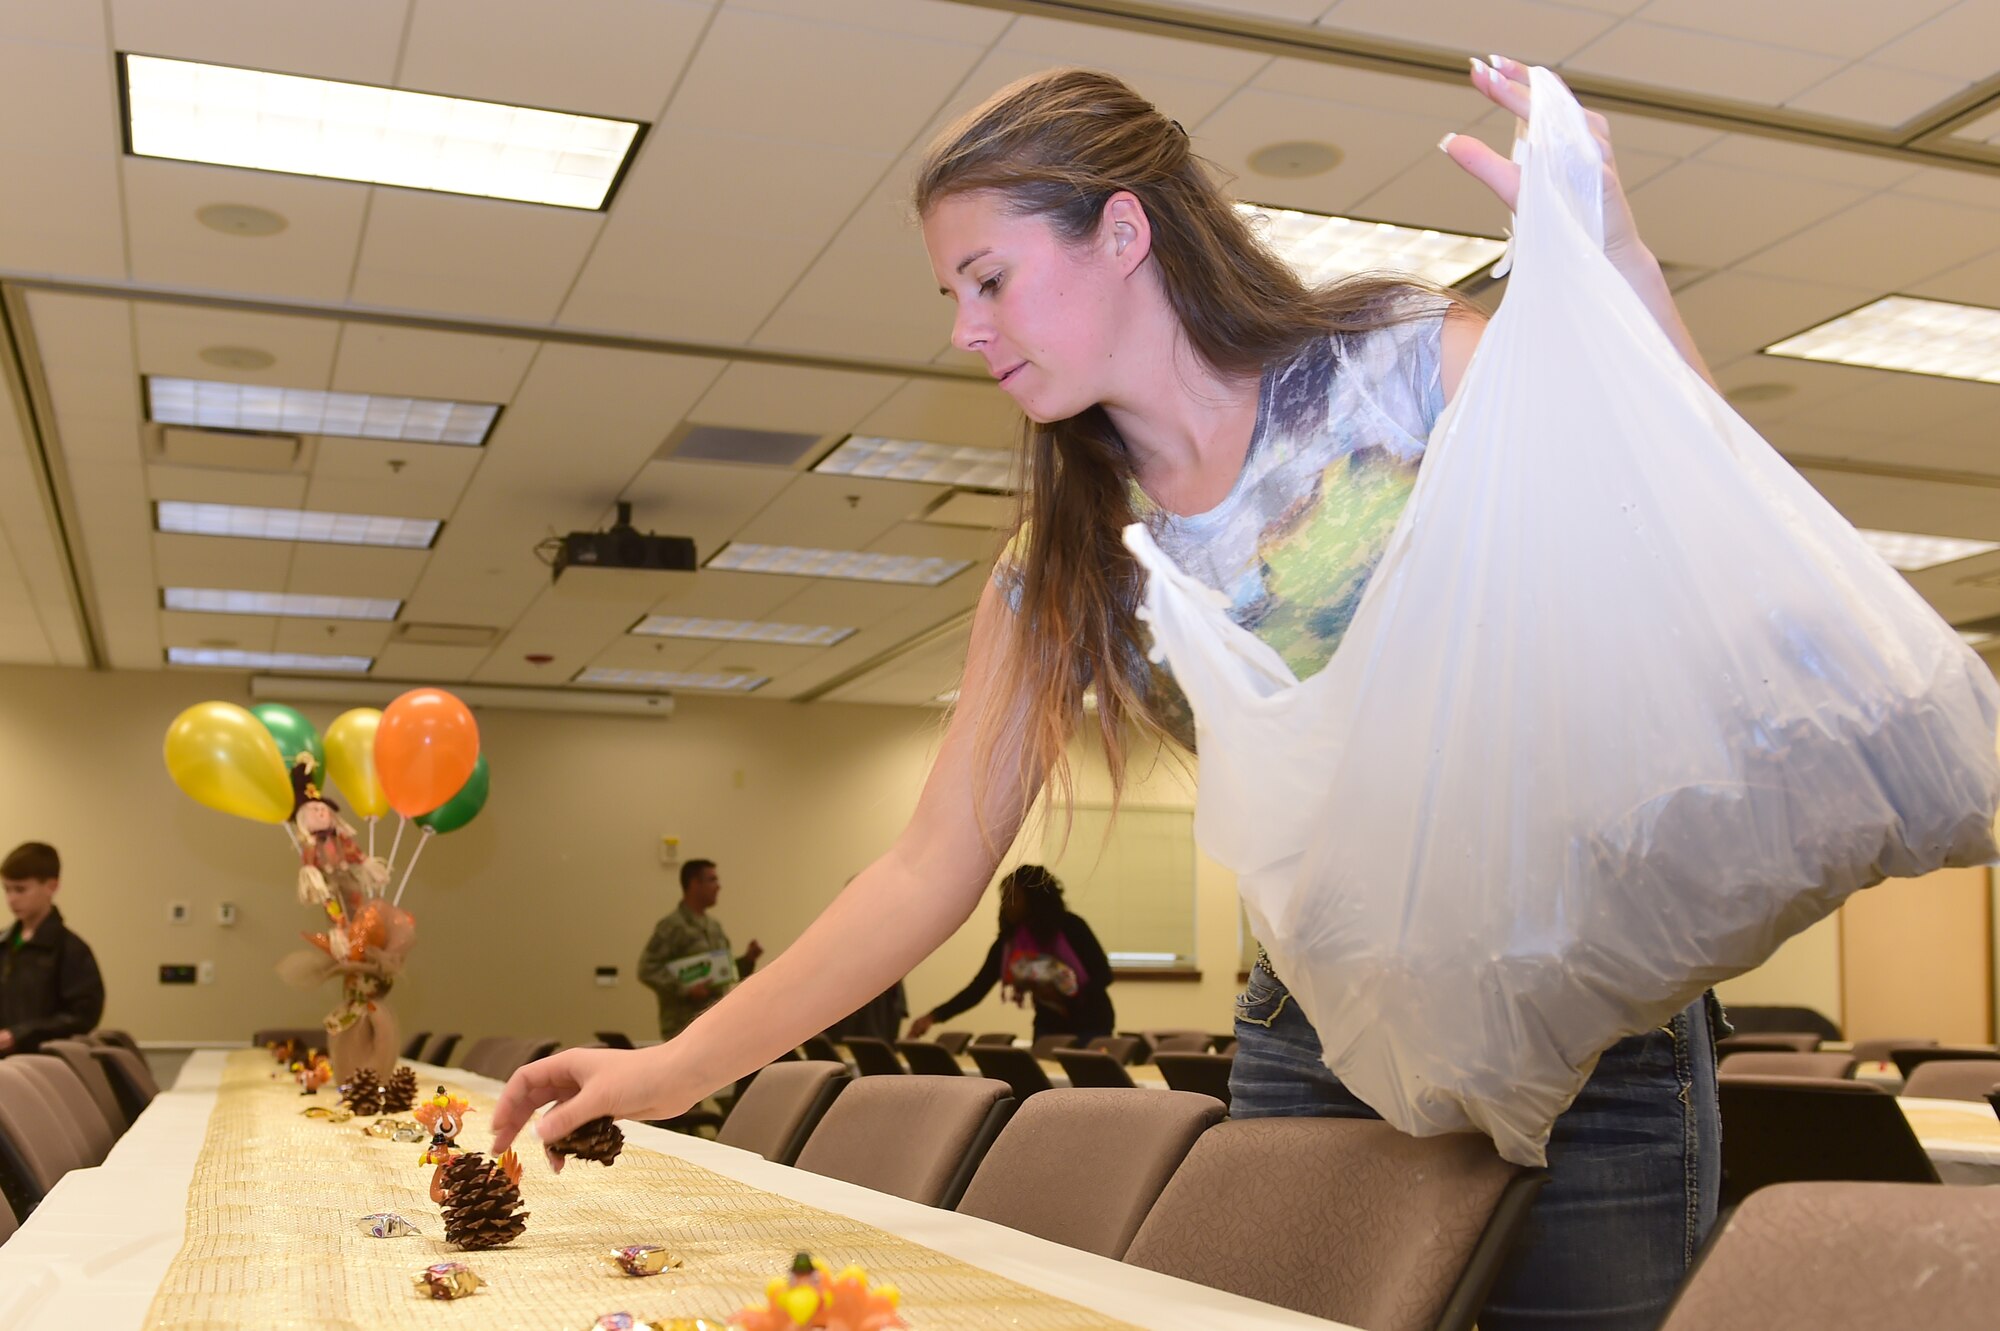 A member of the Buckley Spouses Group sets up table décor for the Thanksgiving meal at the chapel Nov. 25, 2015, on Buckley Air Force Base, Colo. The Buckley First Sergeants Council, Buckley Spouses Group and Buckley Top Three helped organize and put on the Thanksgiving meal for Team Buckley members. (U.S. Air Force photo by Airman 1st Class Luke W. Nowakowski/Released)